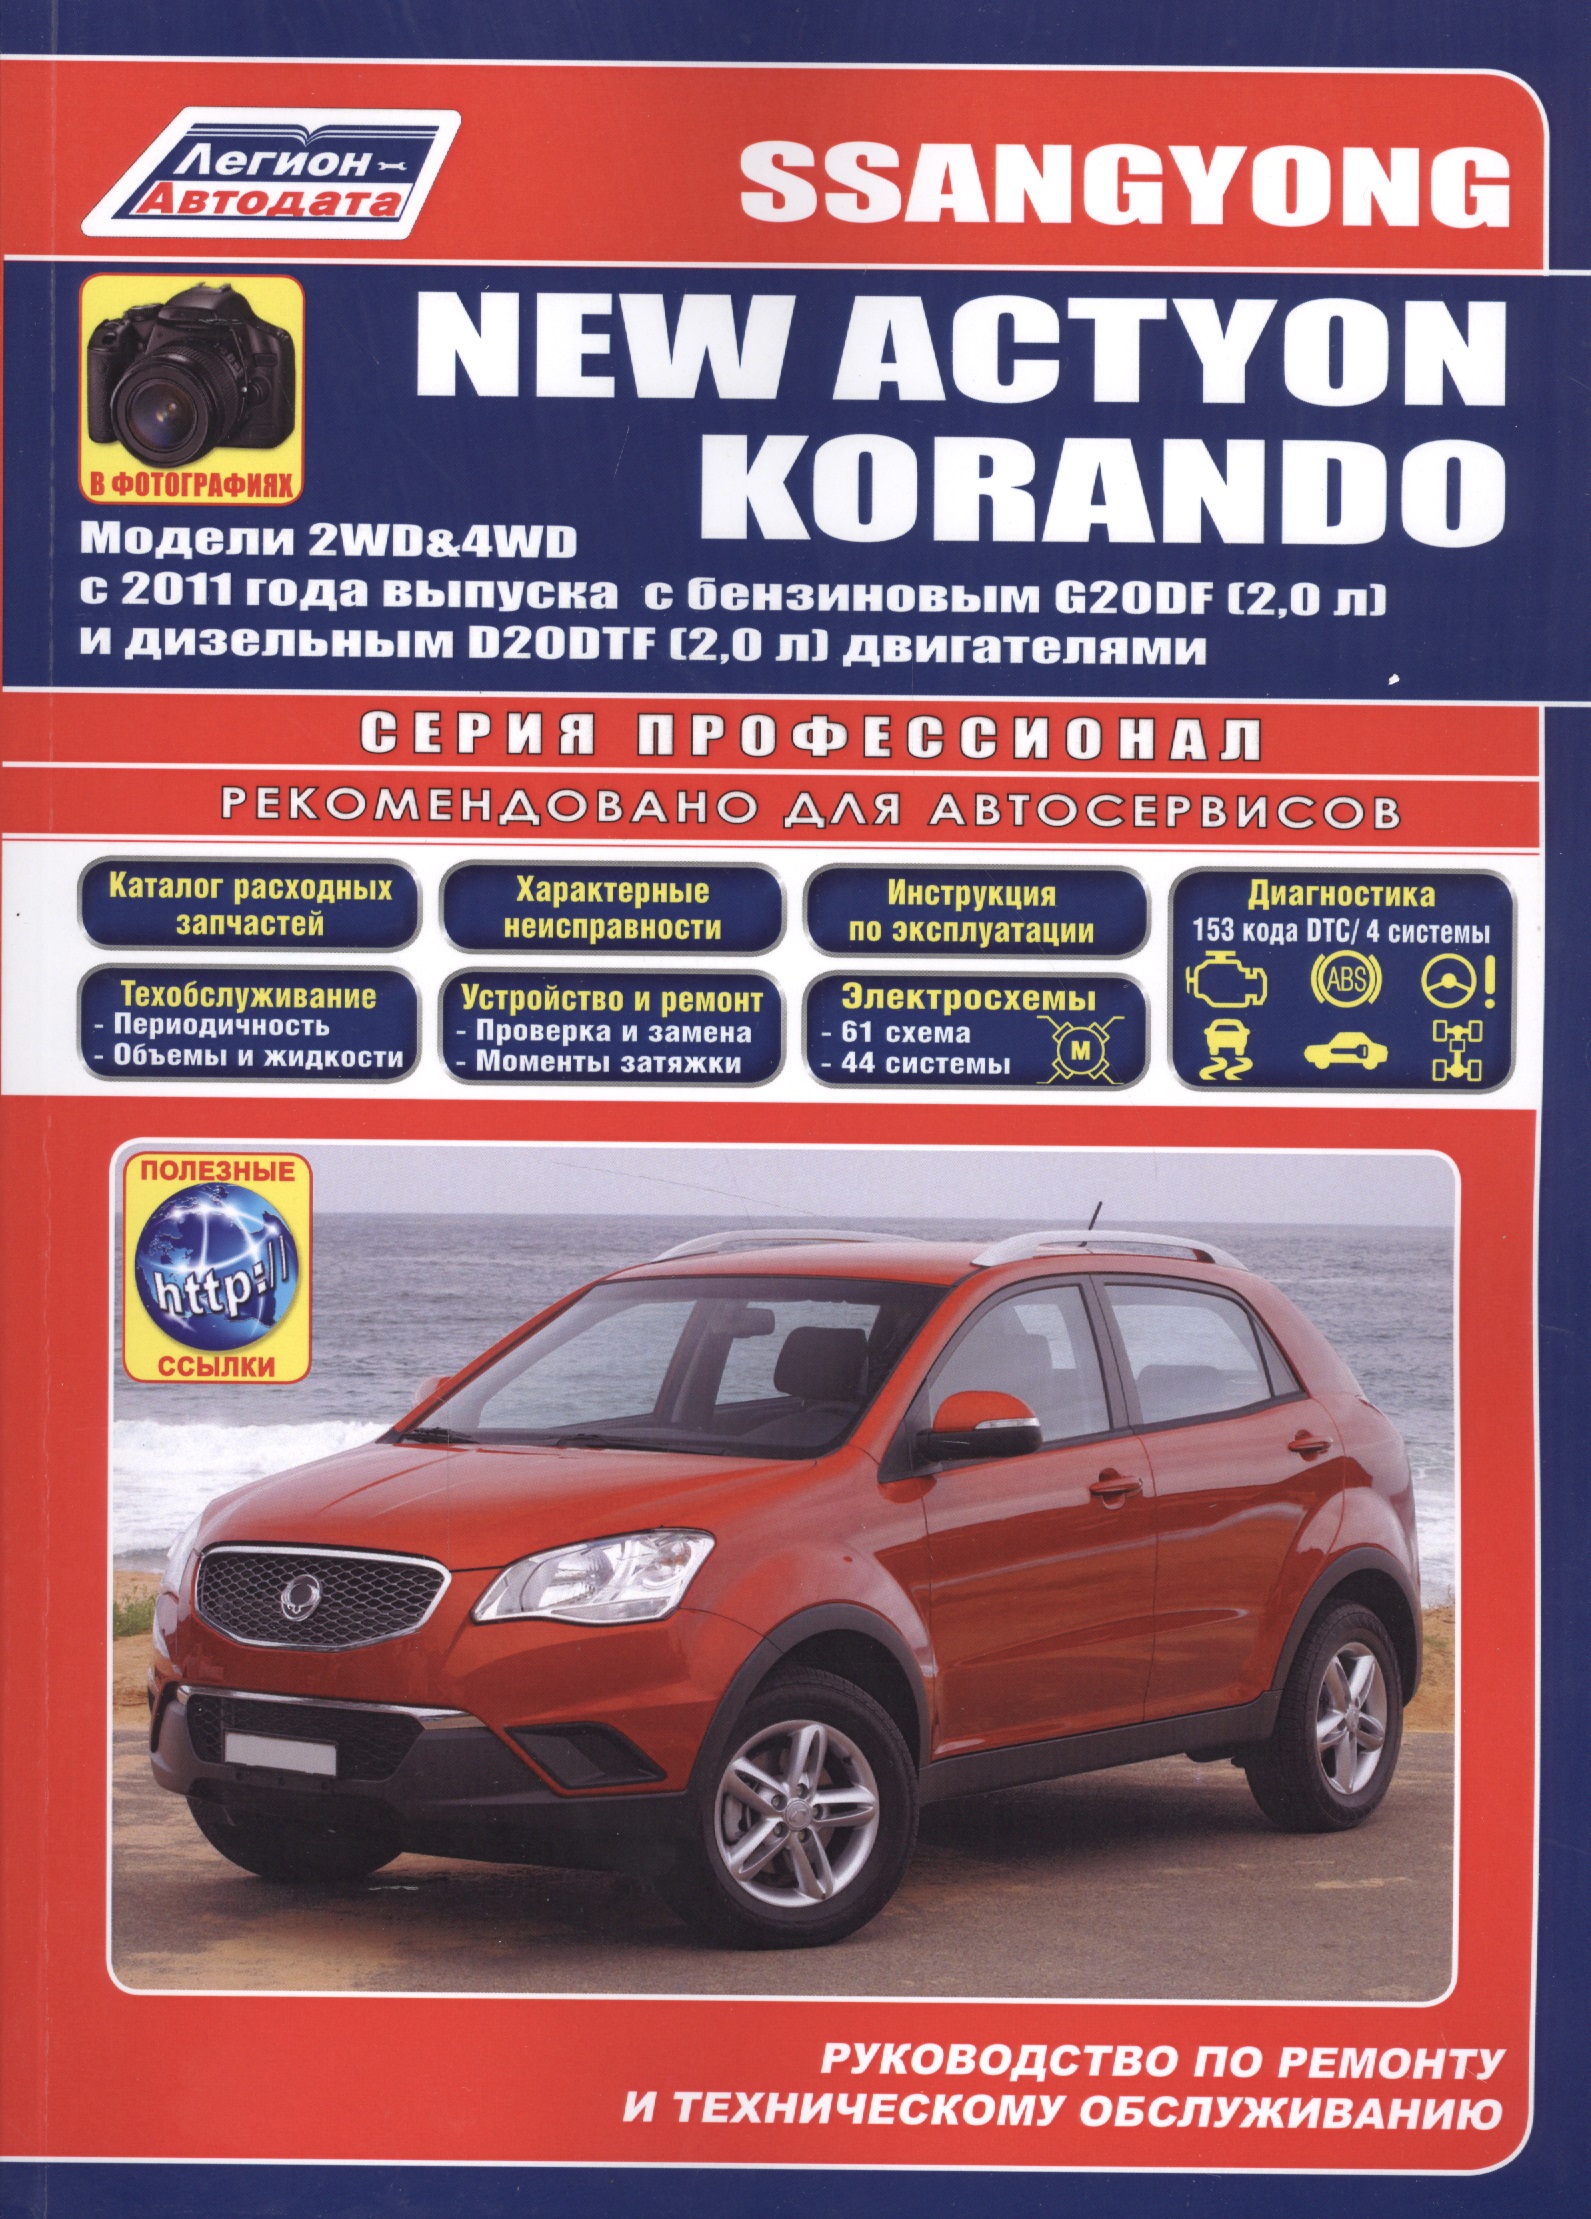 SsangYong New Actyon Korandо в фотогр. Мод. 2WD&4WD с 2011… (мПрофессионал) (+ссылки) 1pcs car front back window stickers decoration accessories for ssangyong actyon turismo ssang yong rodius rexton korando kyron